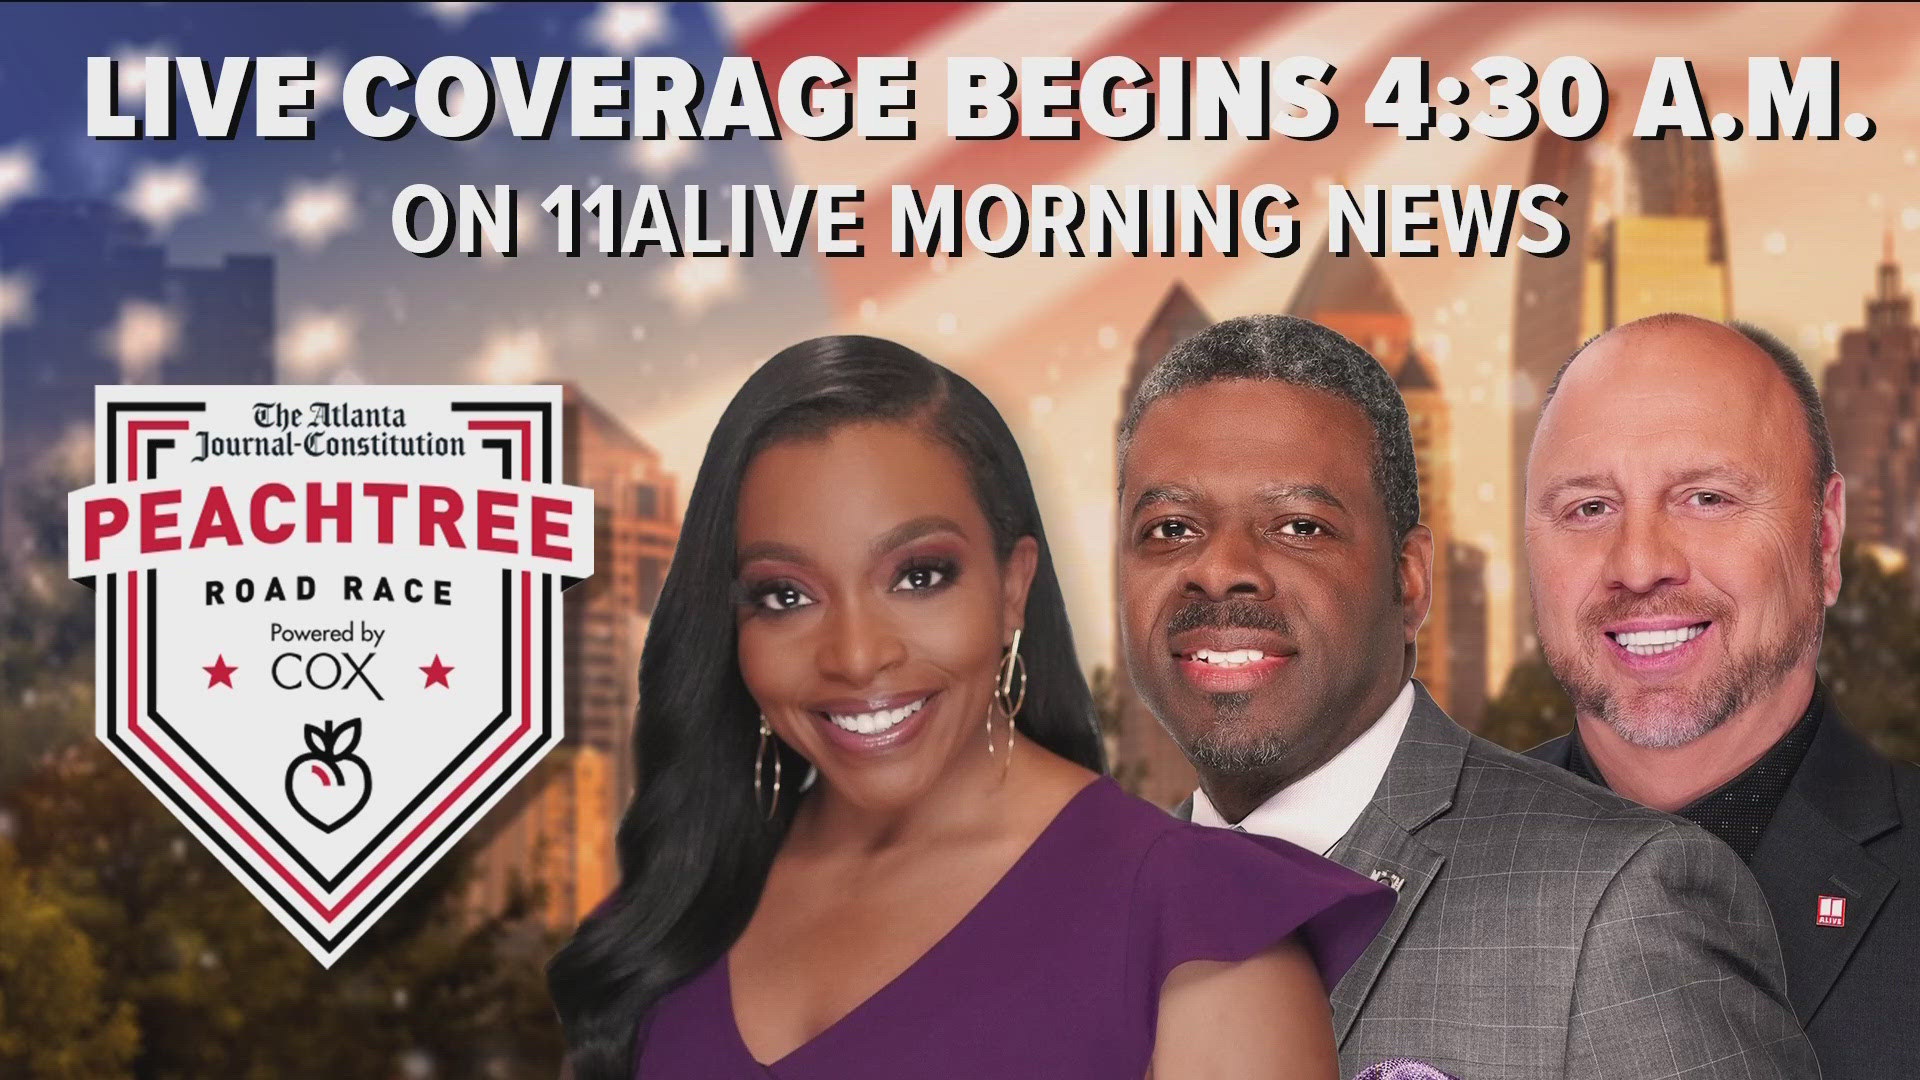 Our coverage starts at 4:30 a.m.